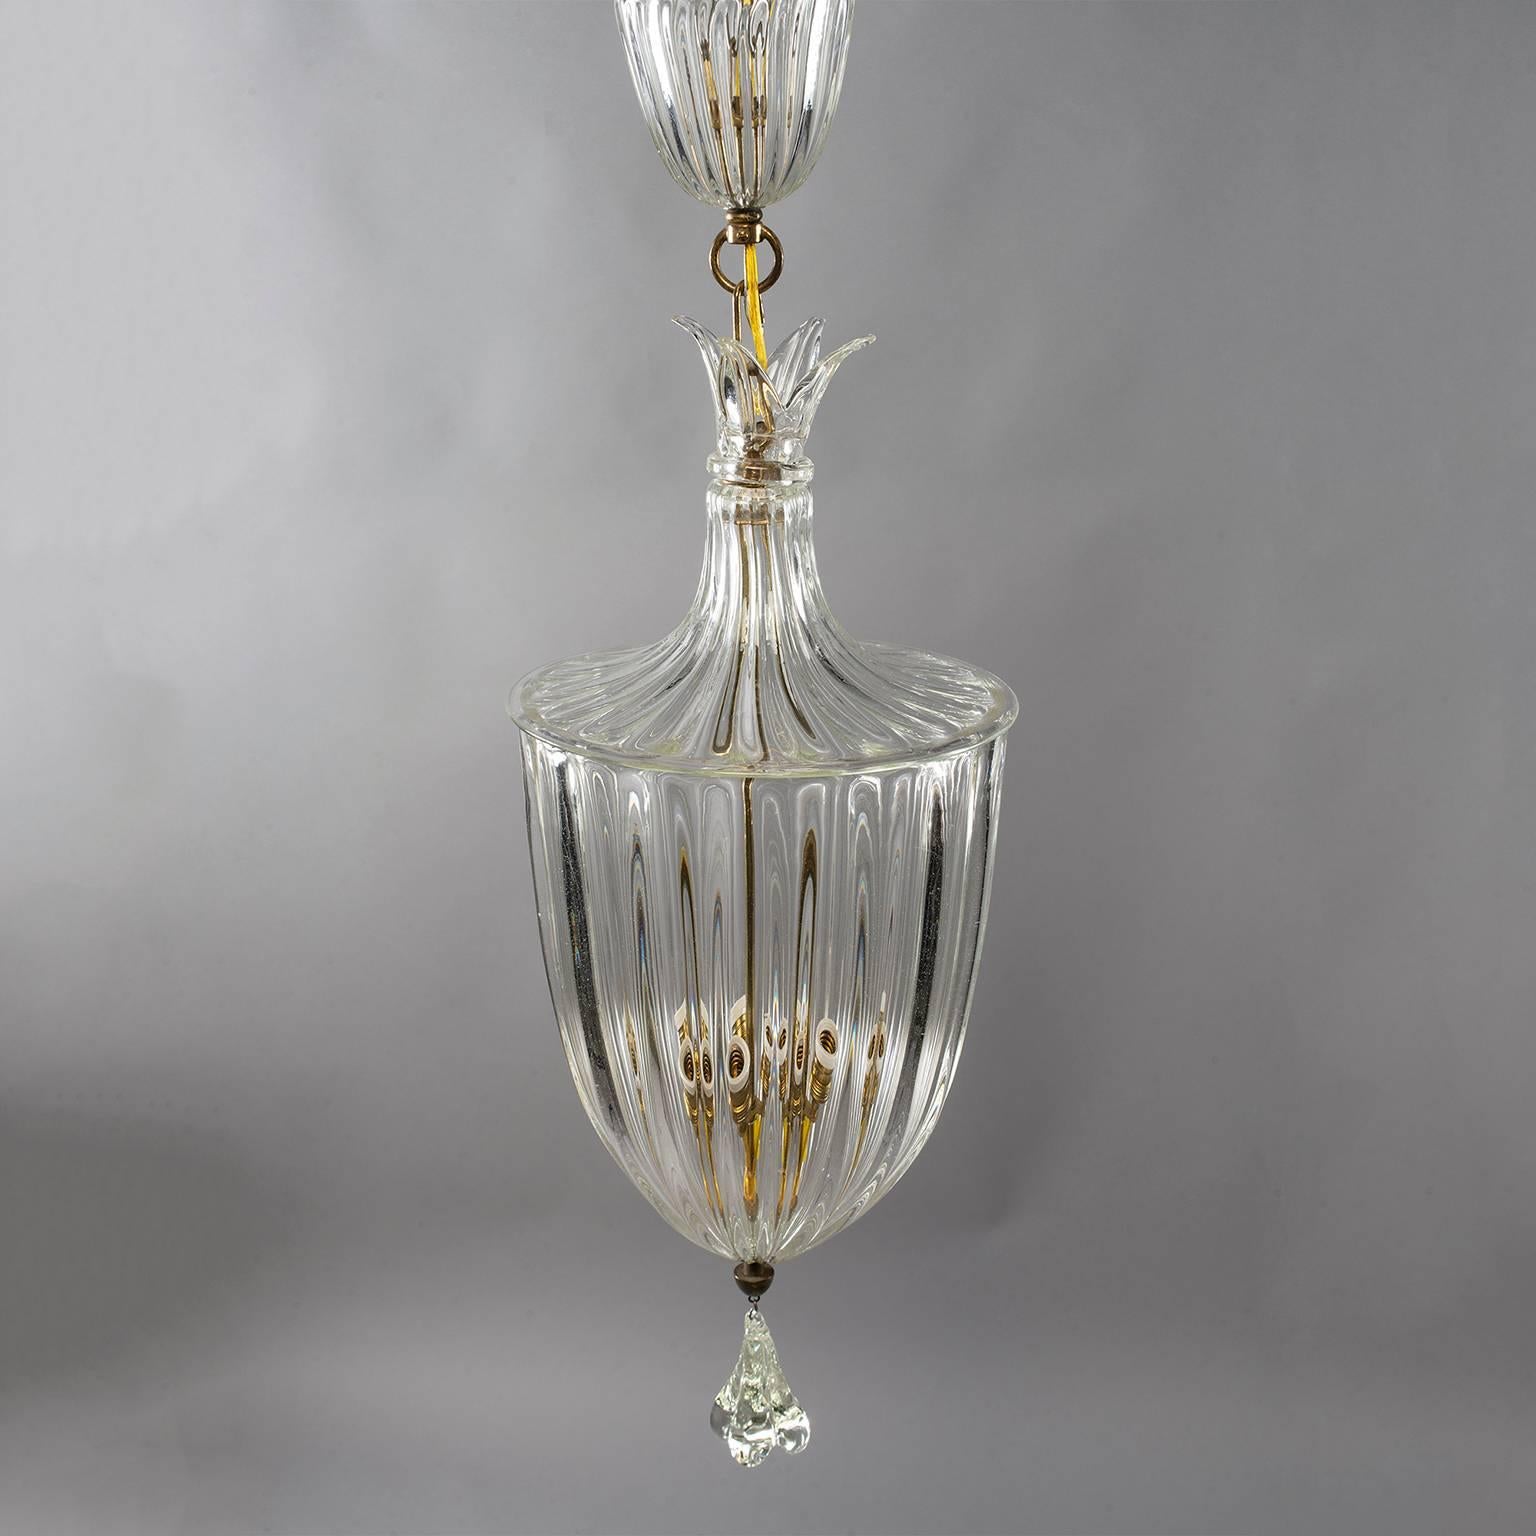 Murano glass lantern style pendant attributed to Barovier and Toso, circa 1930s. Thick clear handblown glass with polished brass hardware. Main vessel has three internal candelabra sized sockets, large clear glass dangling pendant, glass topper,